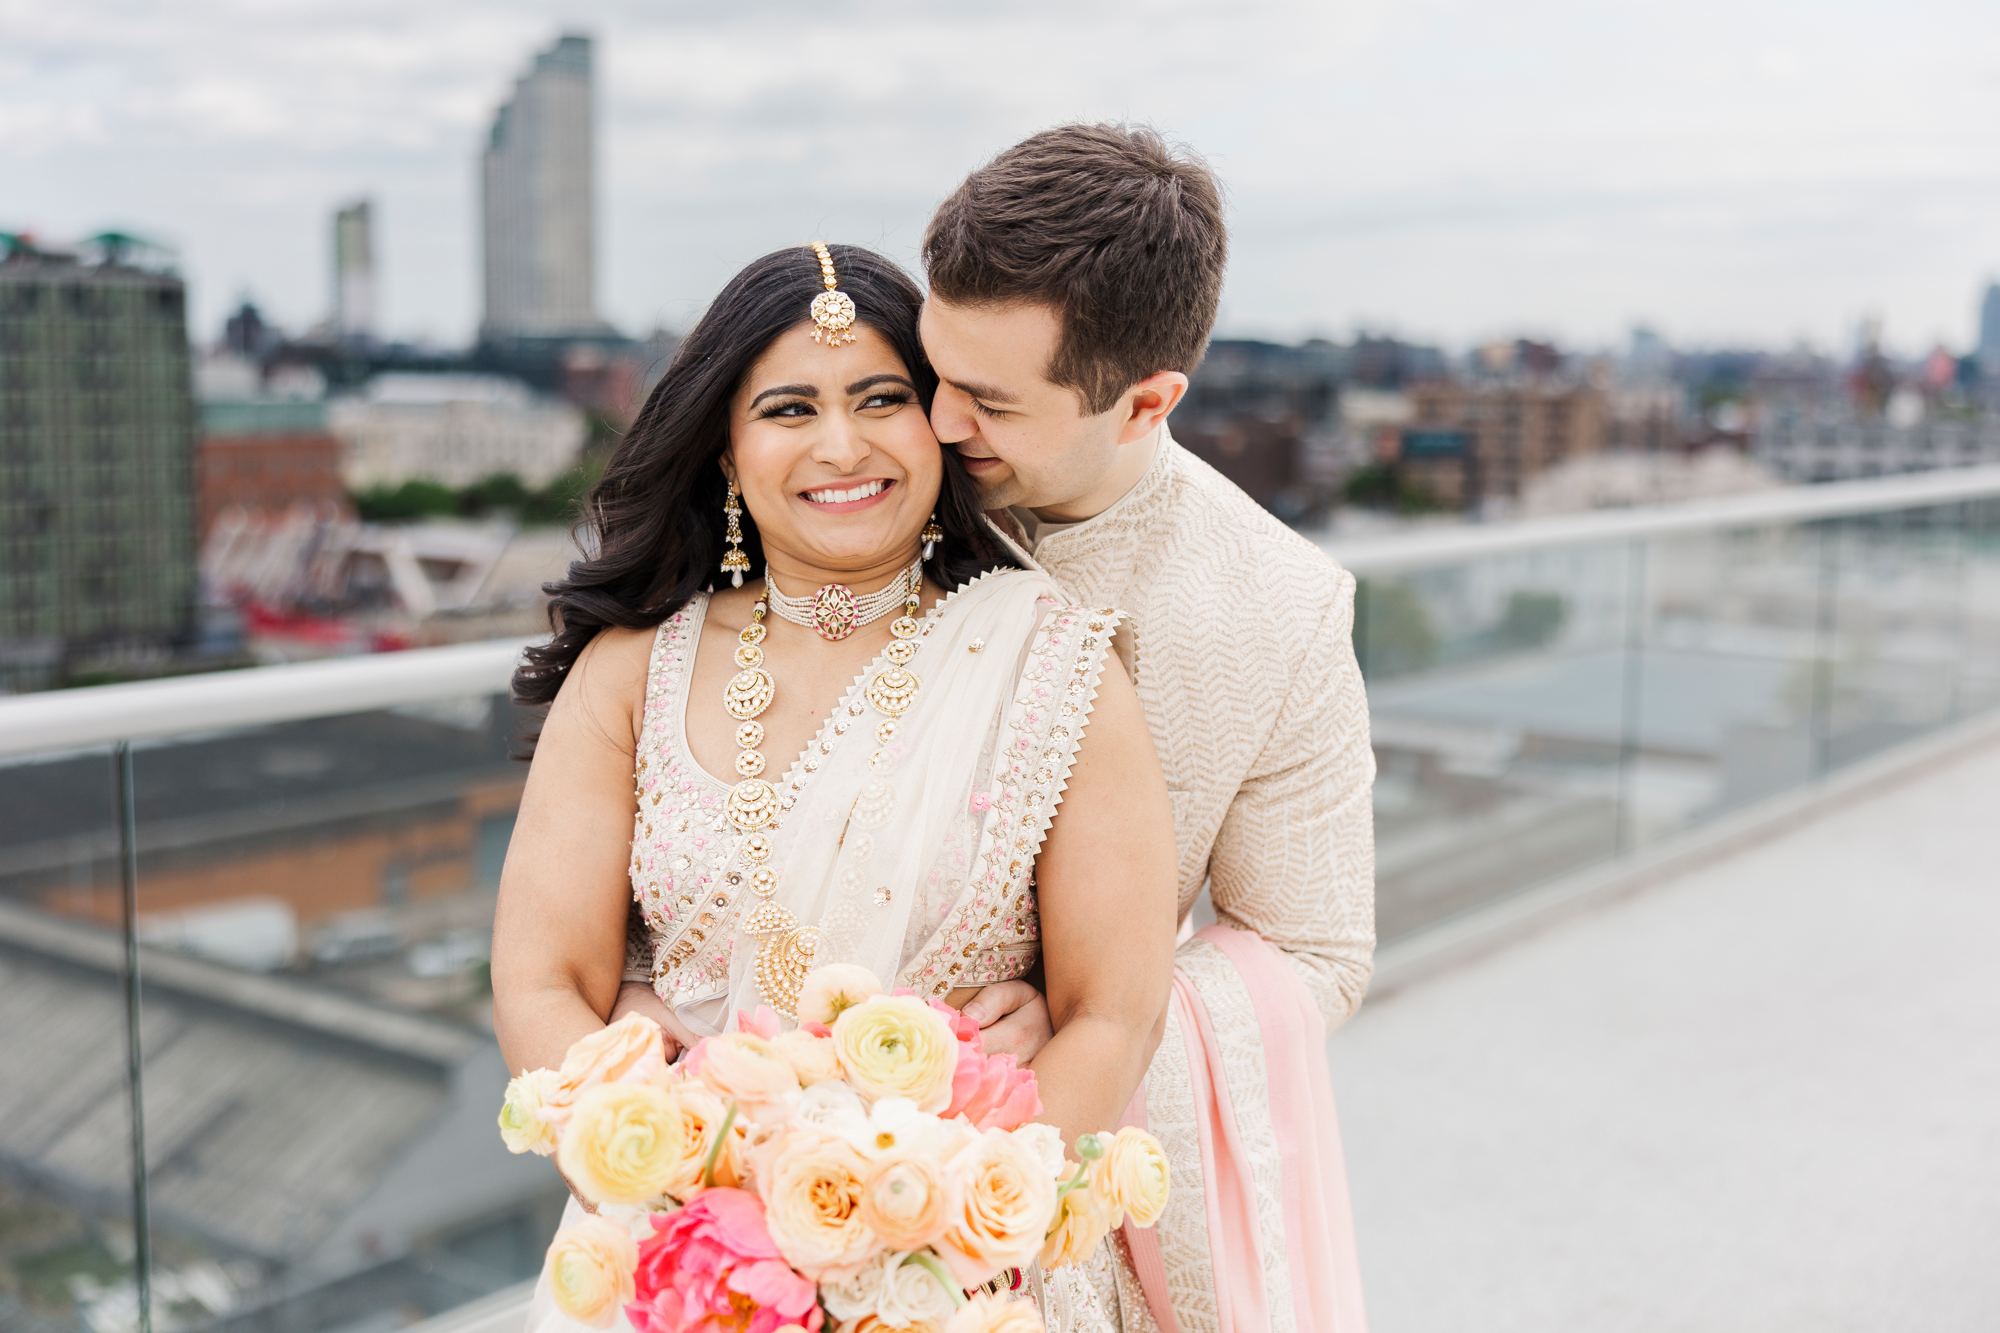 Cheerful Ravel Hotel Wedding in a Peachy, Pastel Palette